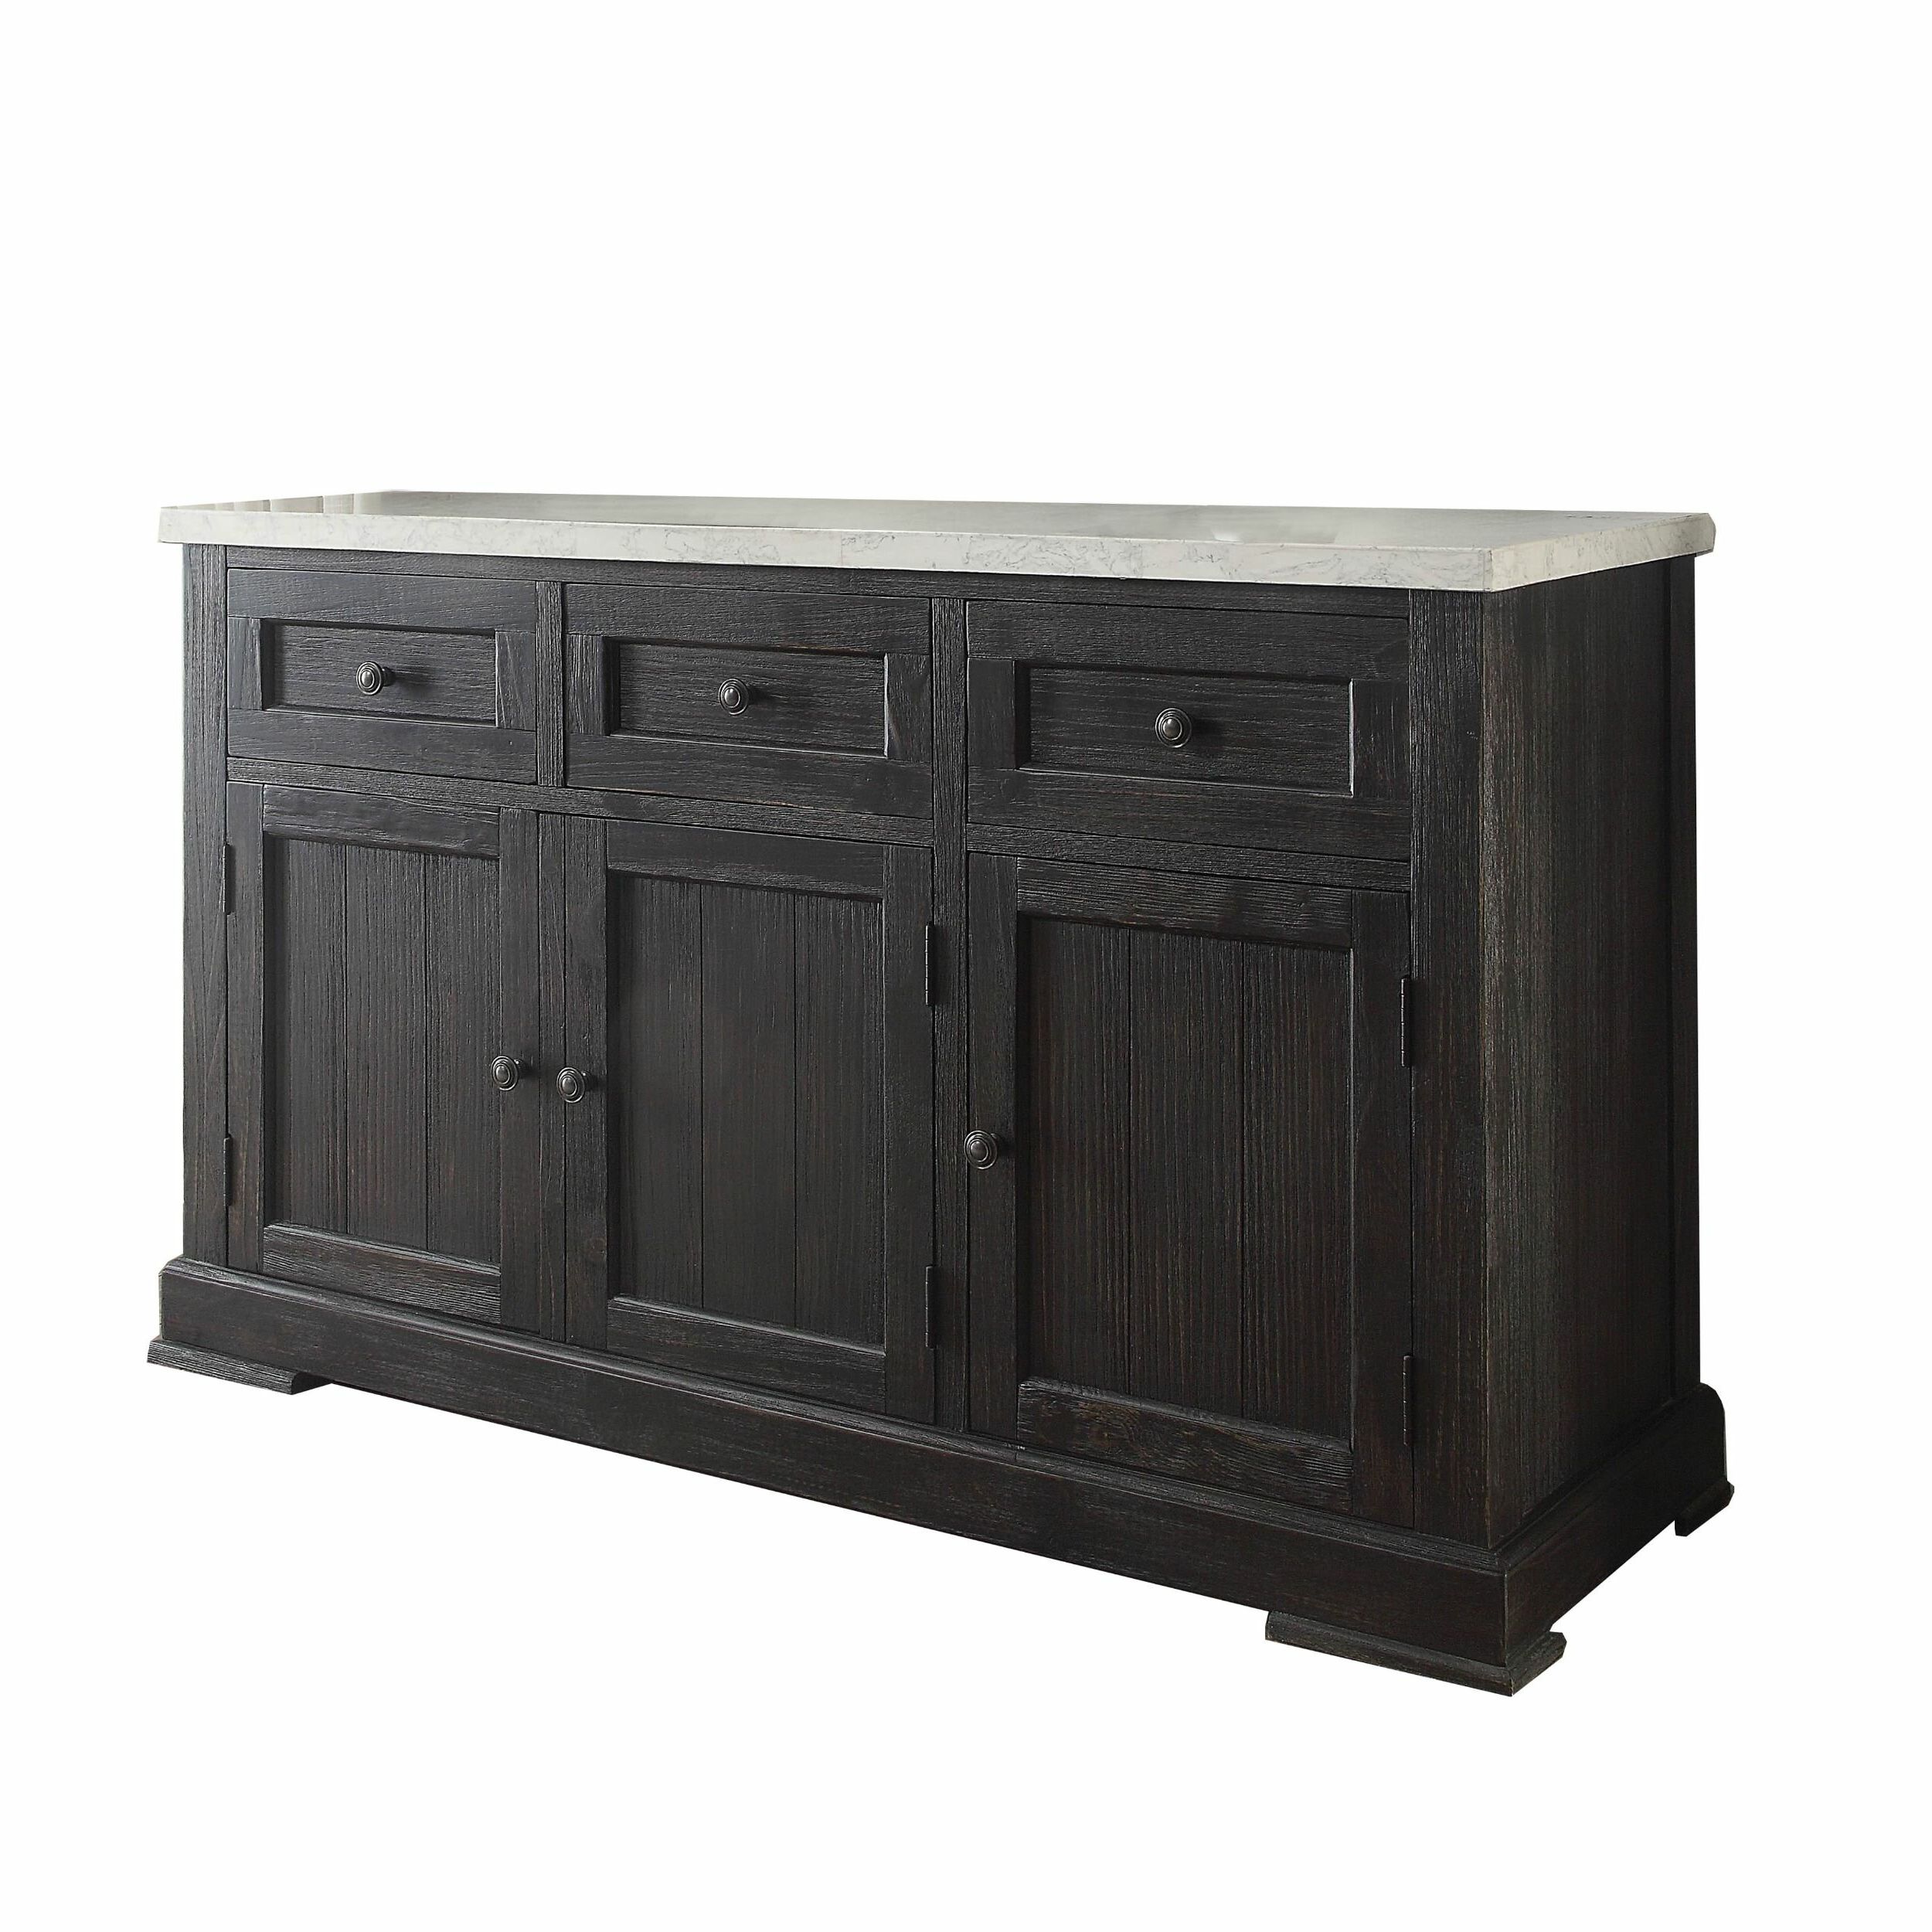 Ballintoy Wooden Sideboard In Phyllis Sideboards (View 4 of 20)